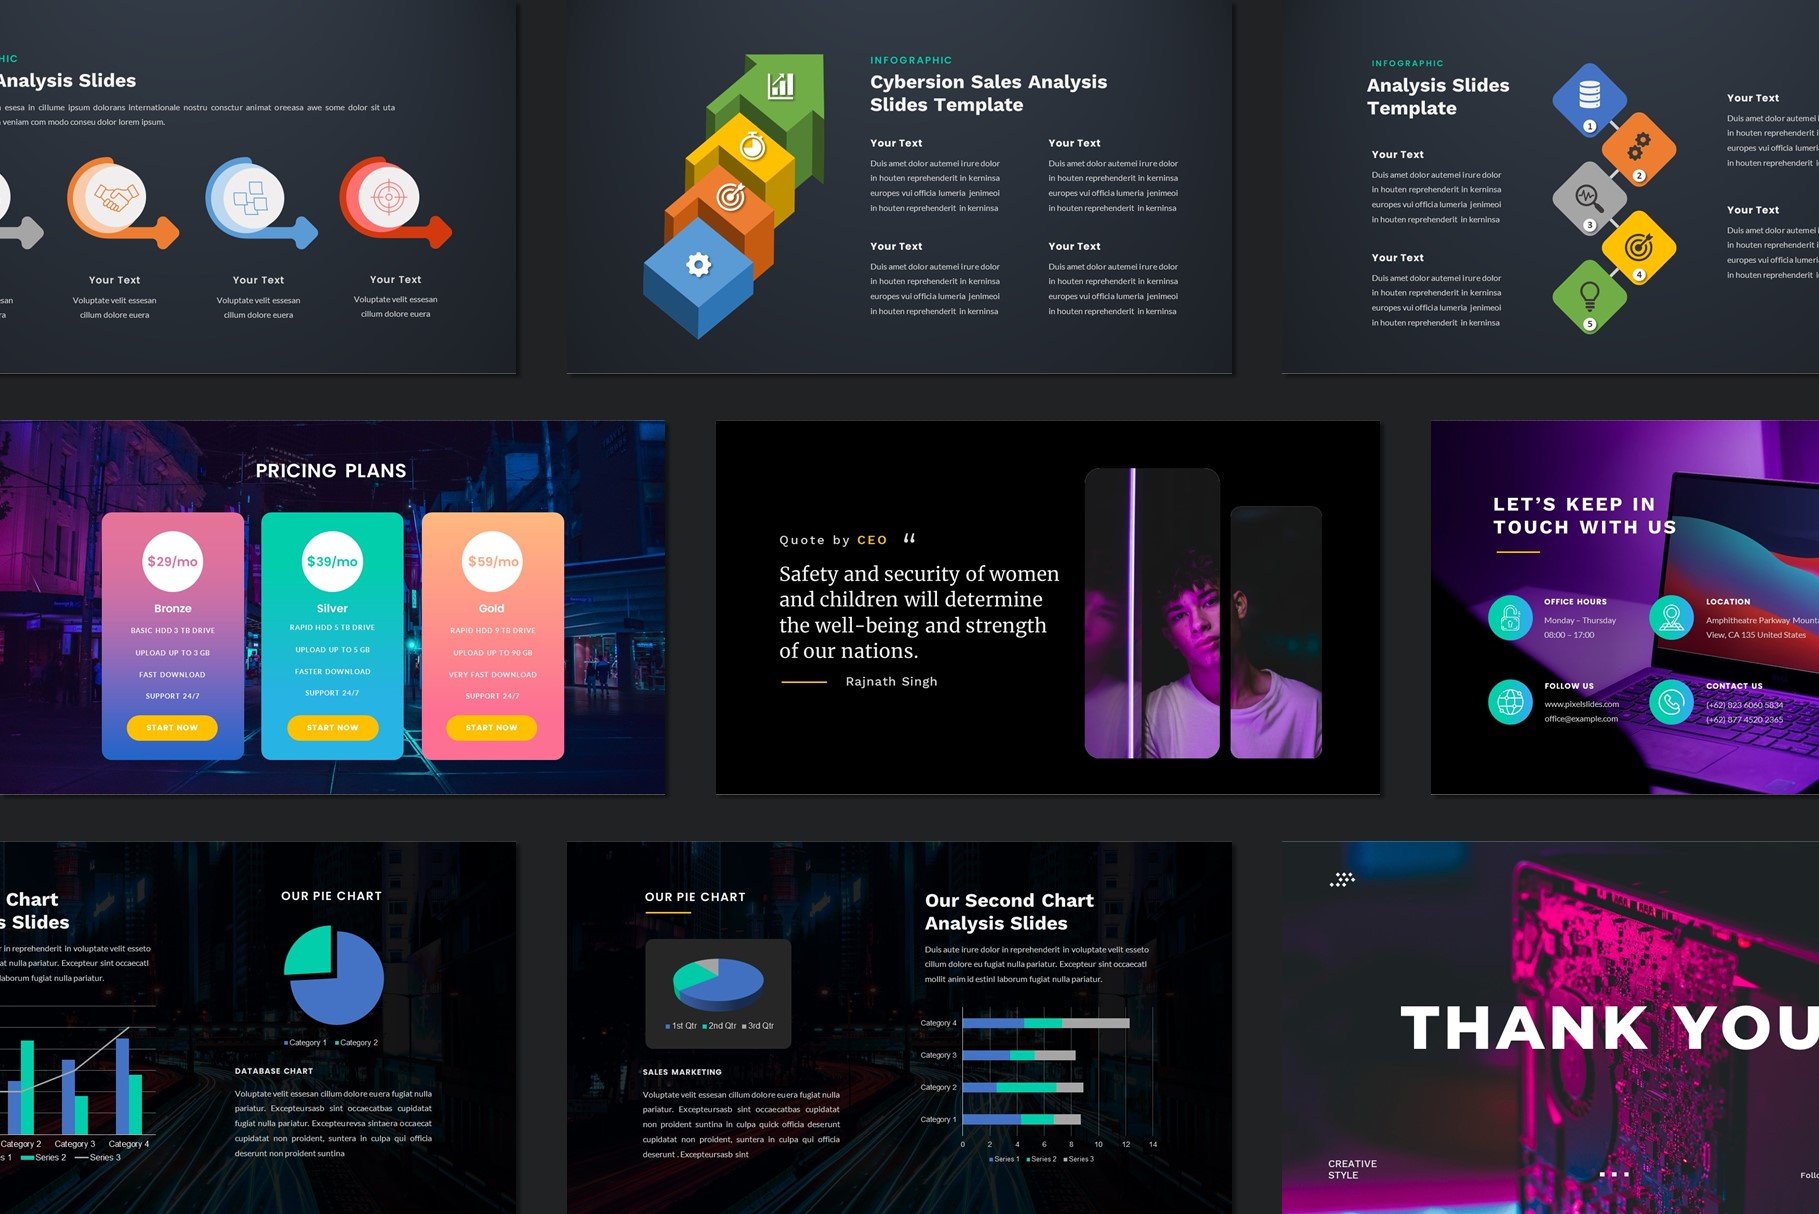 So bright elements for your presentation.